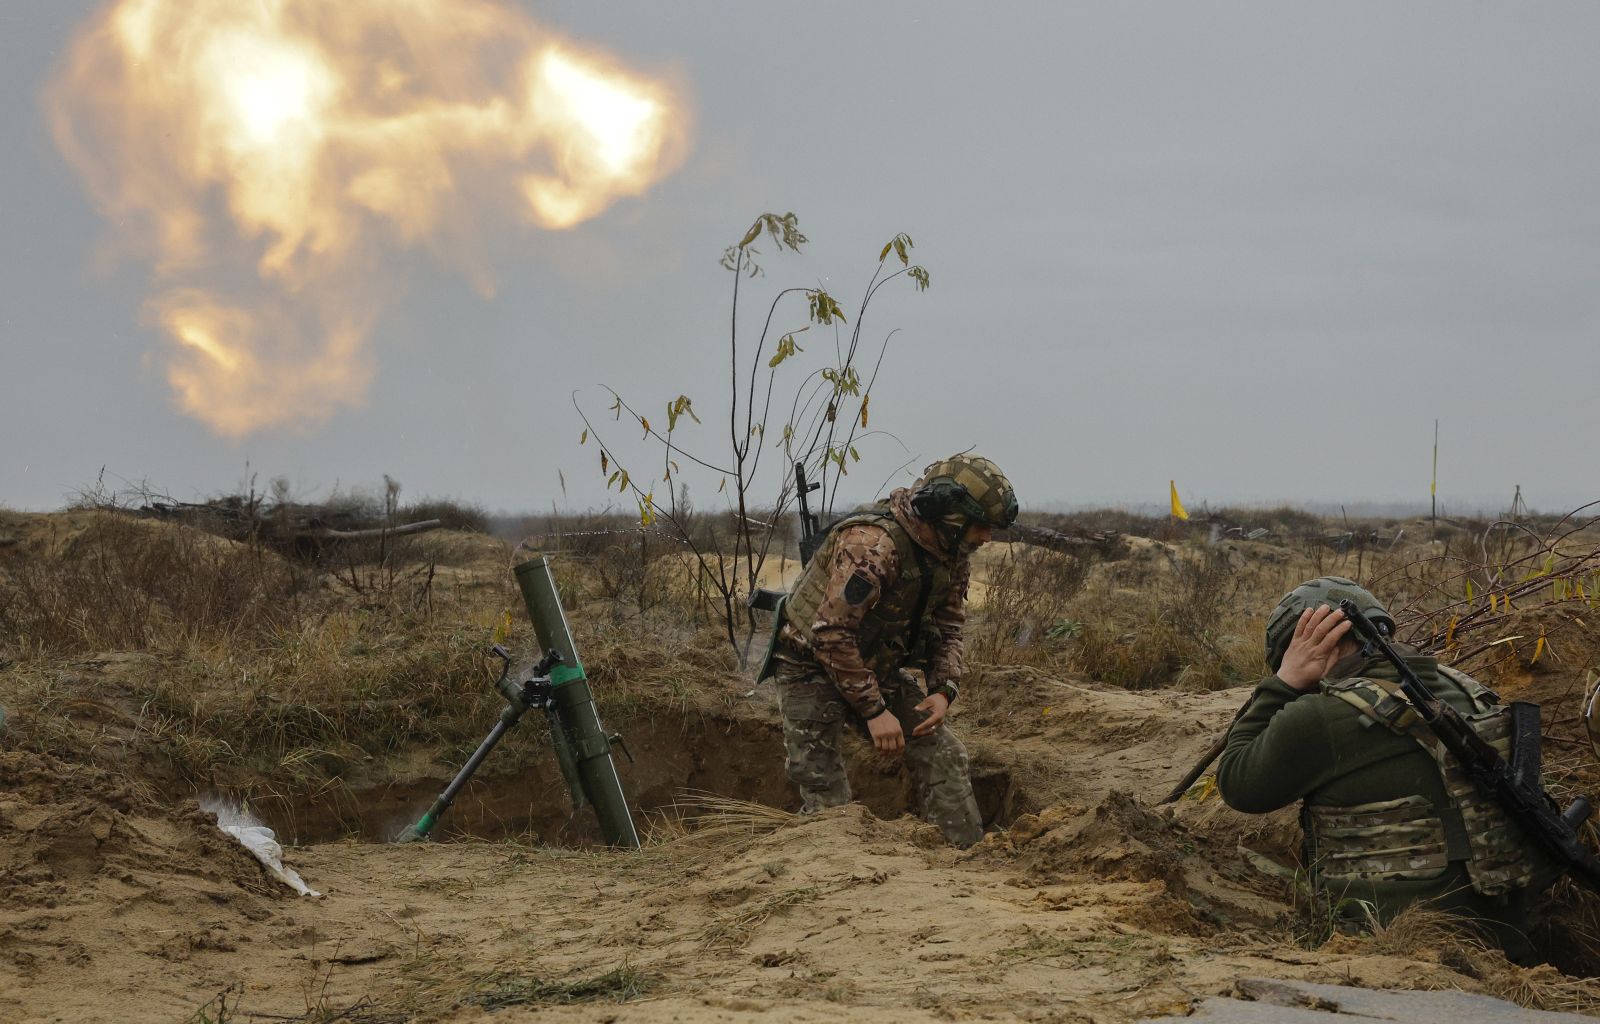 epa10964523 Ukrainian servicemen from the assault brigade 'Bureviy' (Hurricane), a unit of the Ukrainian National Guard, fire 82mm mortar during their military training ahead of their deployment to the frontline, at a shooting range north of Kyiv, Ukraine, 08 November 2023, amid the Russian invasion. The 'Bureviy' is one of nine assault brigades, part of Ukraine's 'Offensive Guard'. The Ministry of Internal Affairs of Ukraine announced in February 2023 the formation of assault brigades, which can be joined by volunteers, aimed at strengthening Ukraine's defense and 'liberating the occupied territories' from Russian forces. Russian troops entered Ukrainian territory in February 2022, starting a conflict that has provoked destruction and a humanitarian crisis.  EPA/SERGEY DOLZHENKO